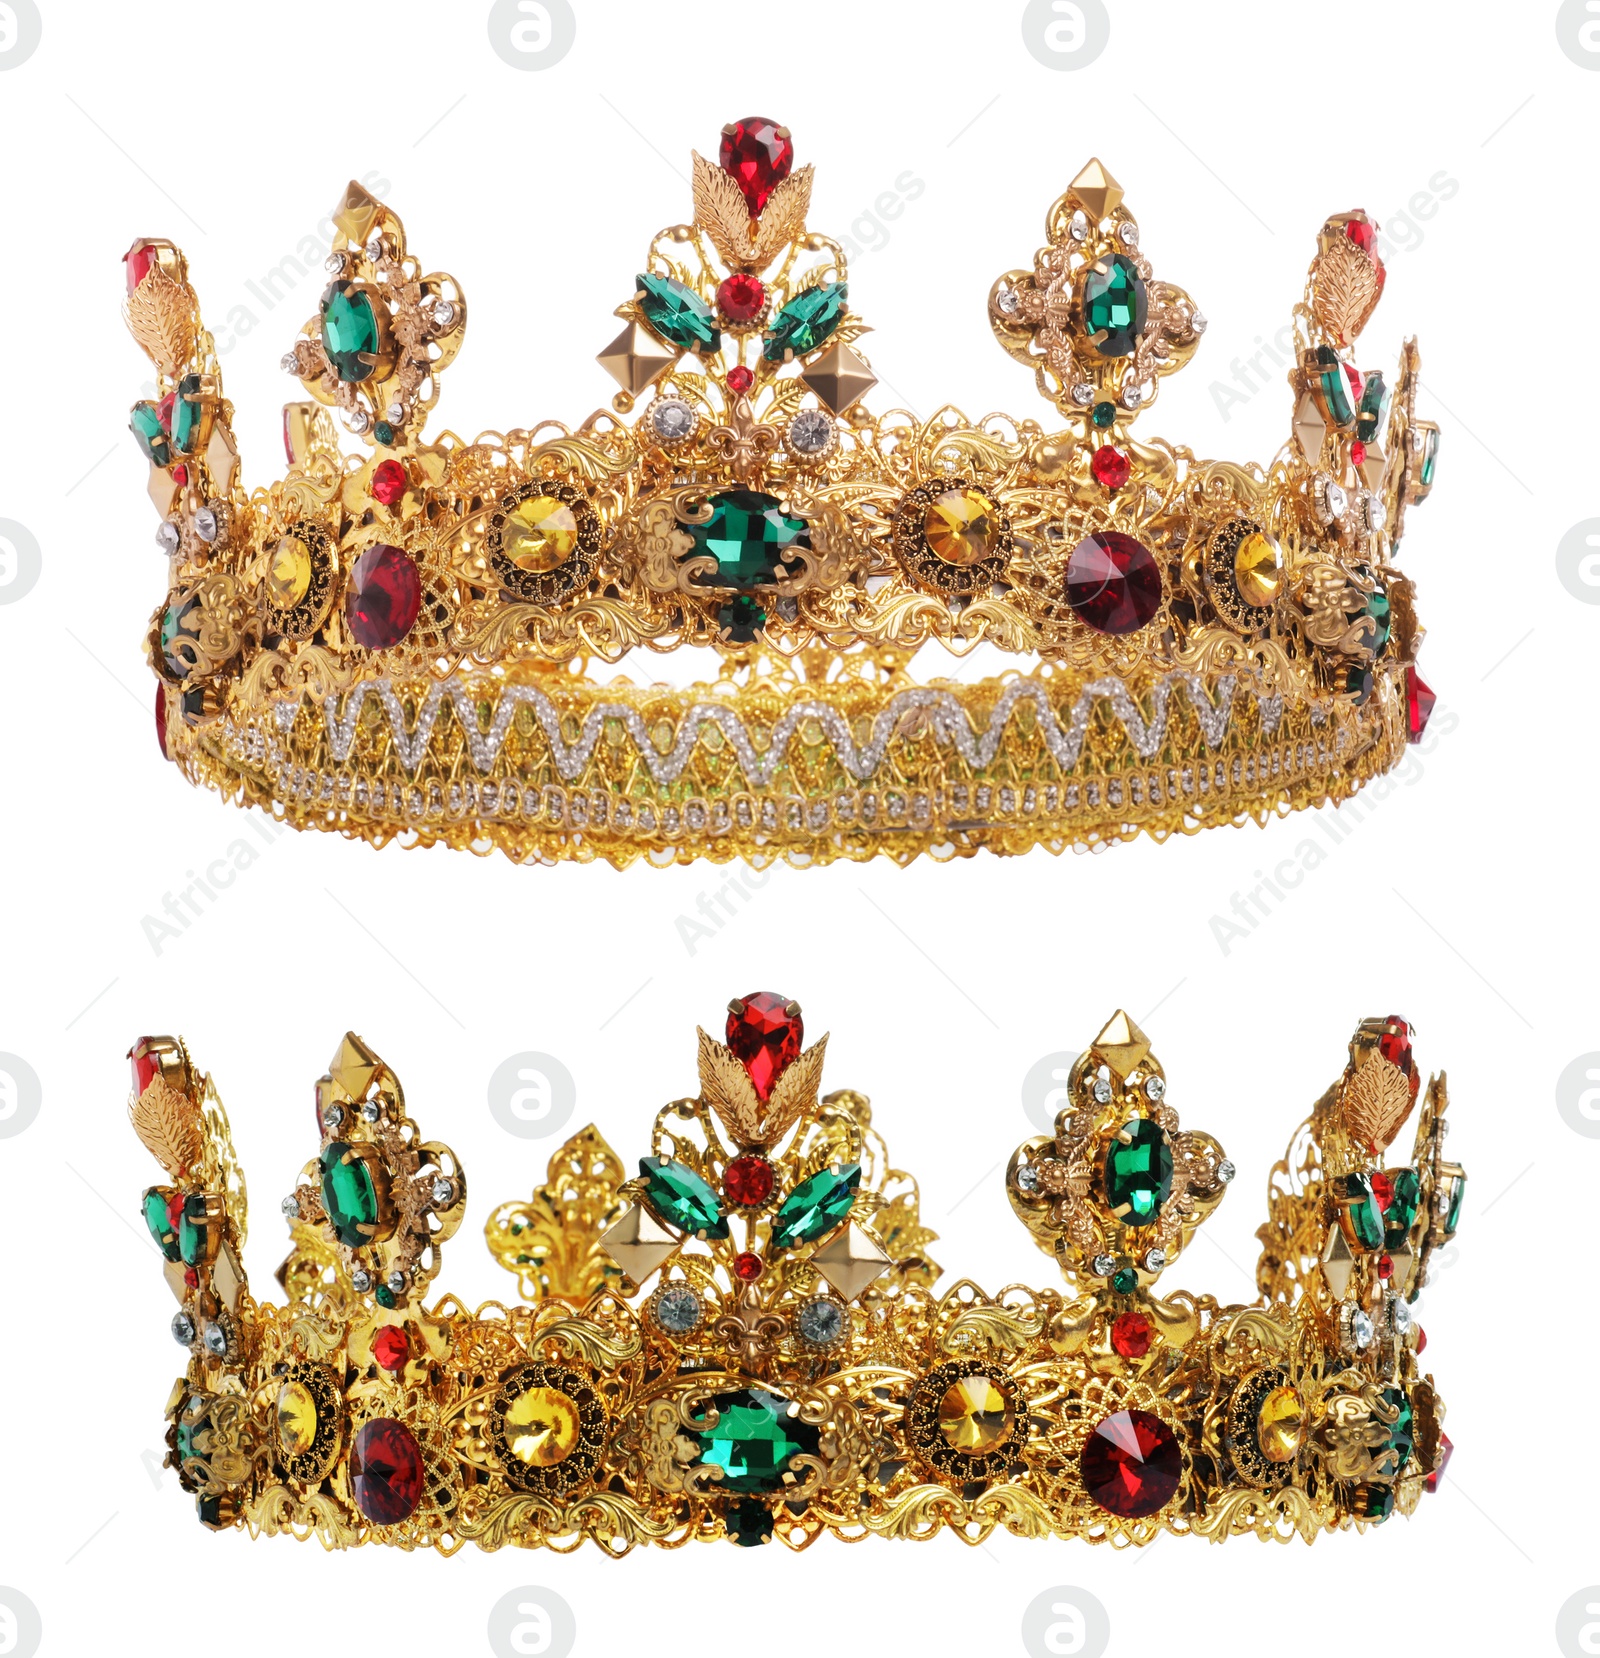 Image of Beautiful gold crown with gems on white background, views from different sides